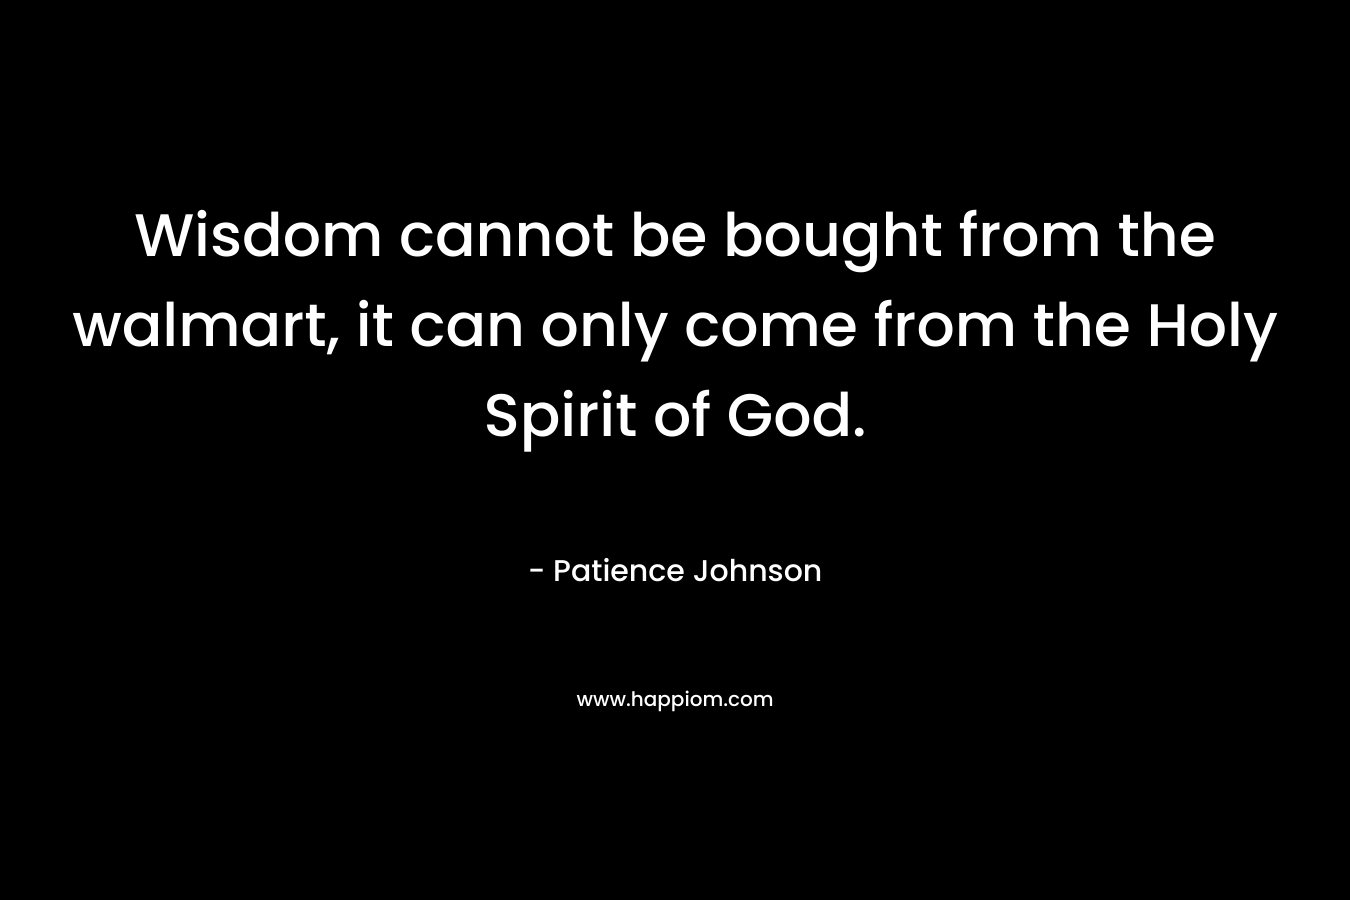 Wisdom cannot be bought from the walmart, it can only come from the Holy Spirit of God. – Patience Johnson